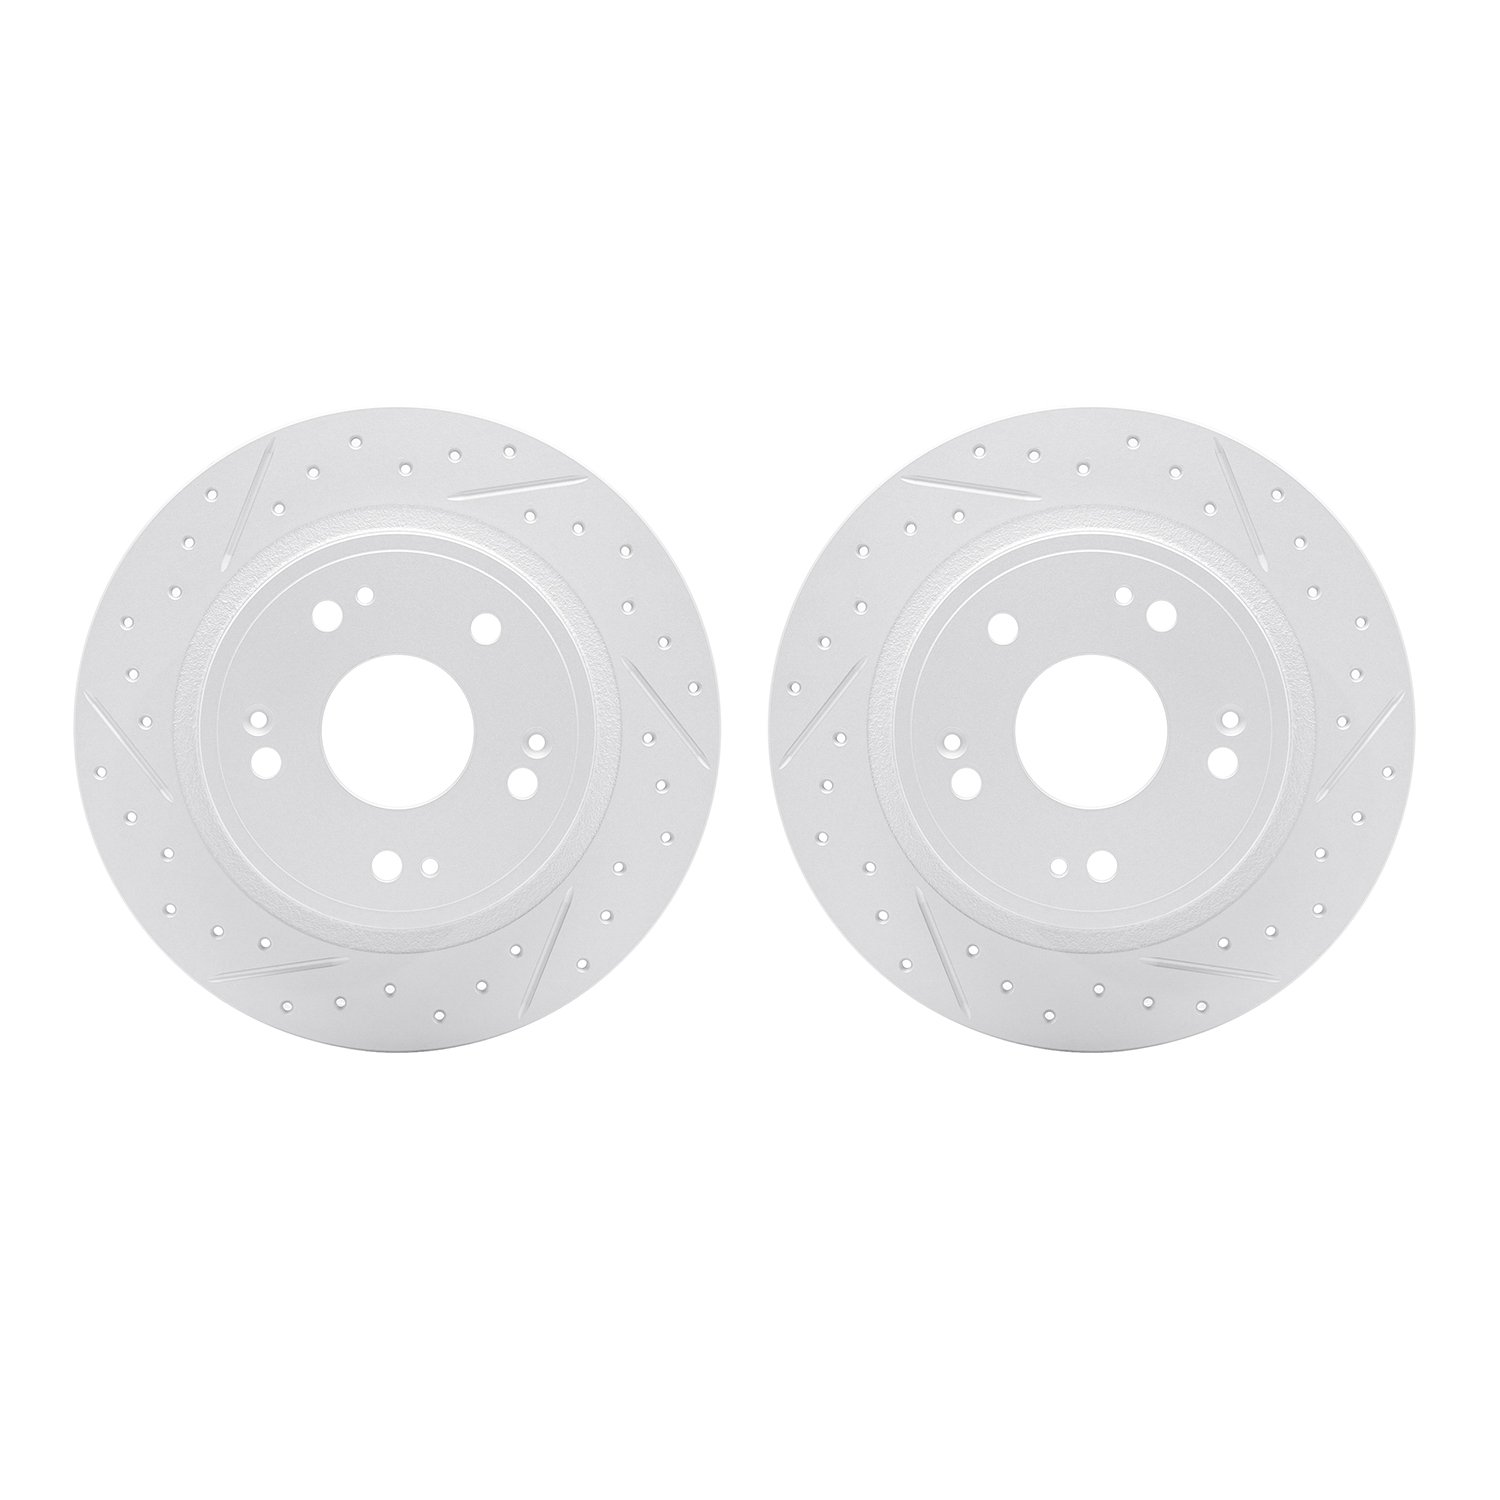 2002-59034 Geoperformance Drilled/Slotted Brake Rotors, Fits Select Acura/Honda, Position: Rear